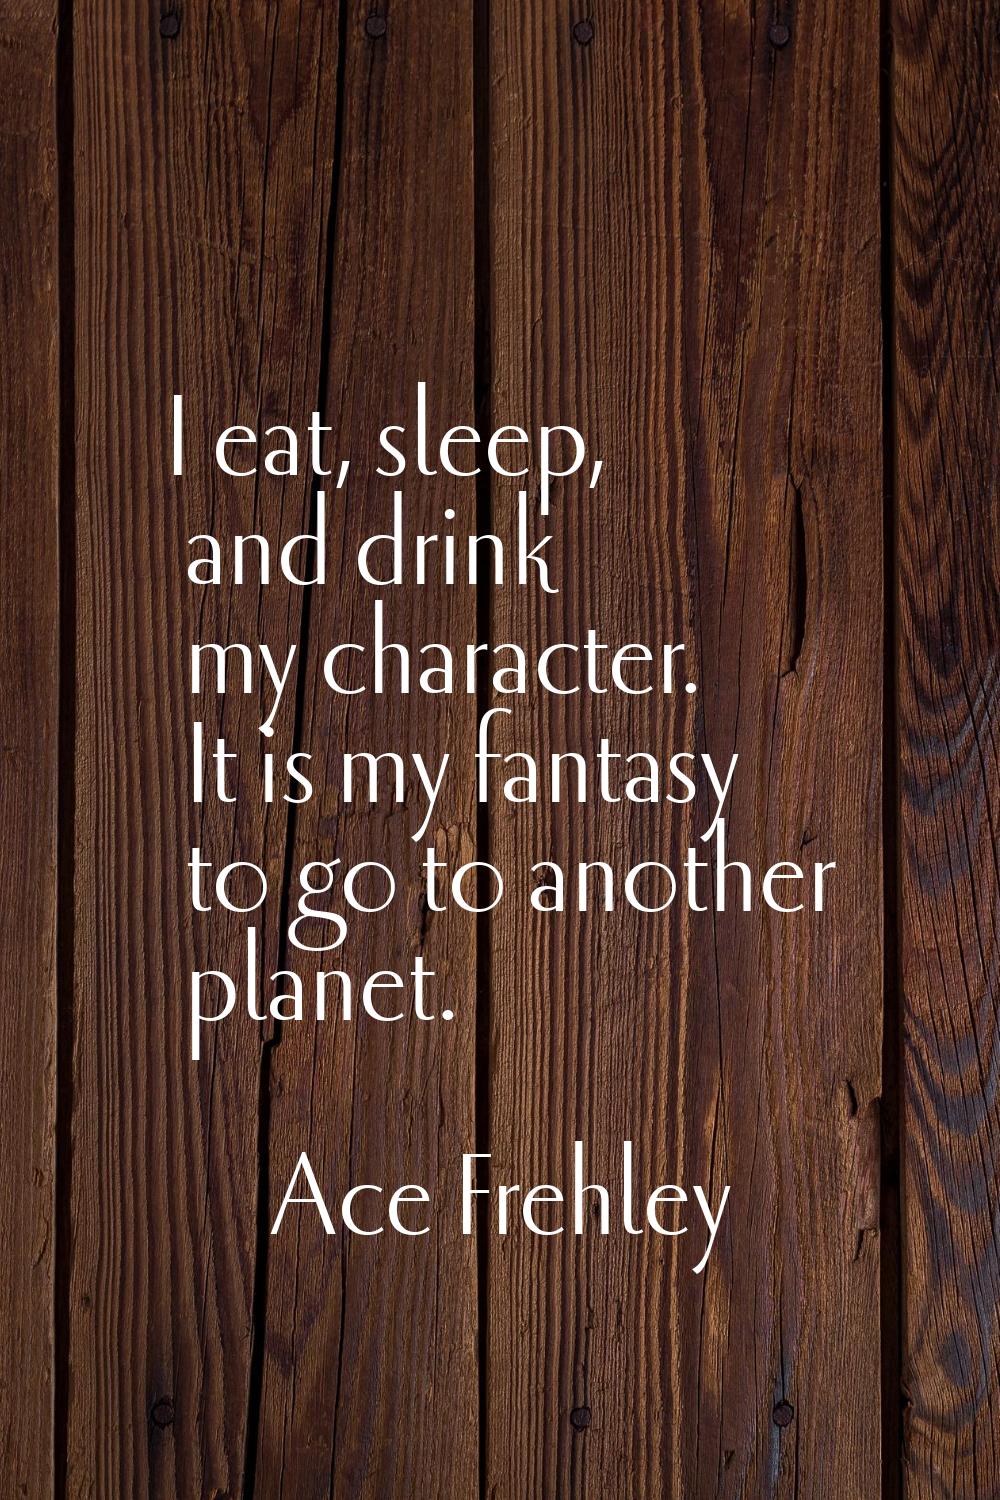 I eat, sleep, and drink my character. It is my fantasy to go to another planet.